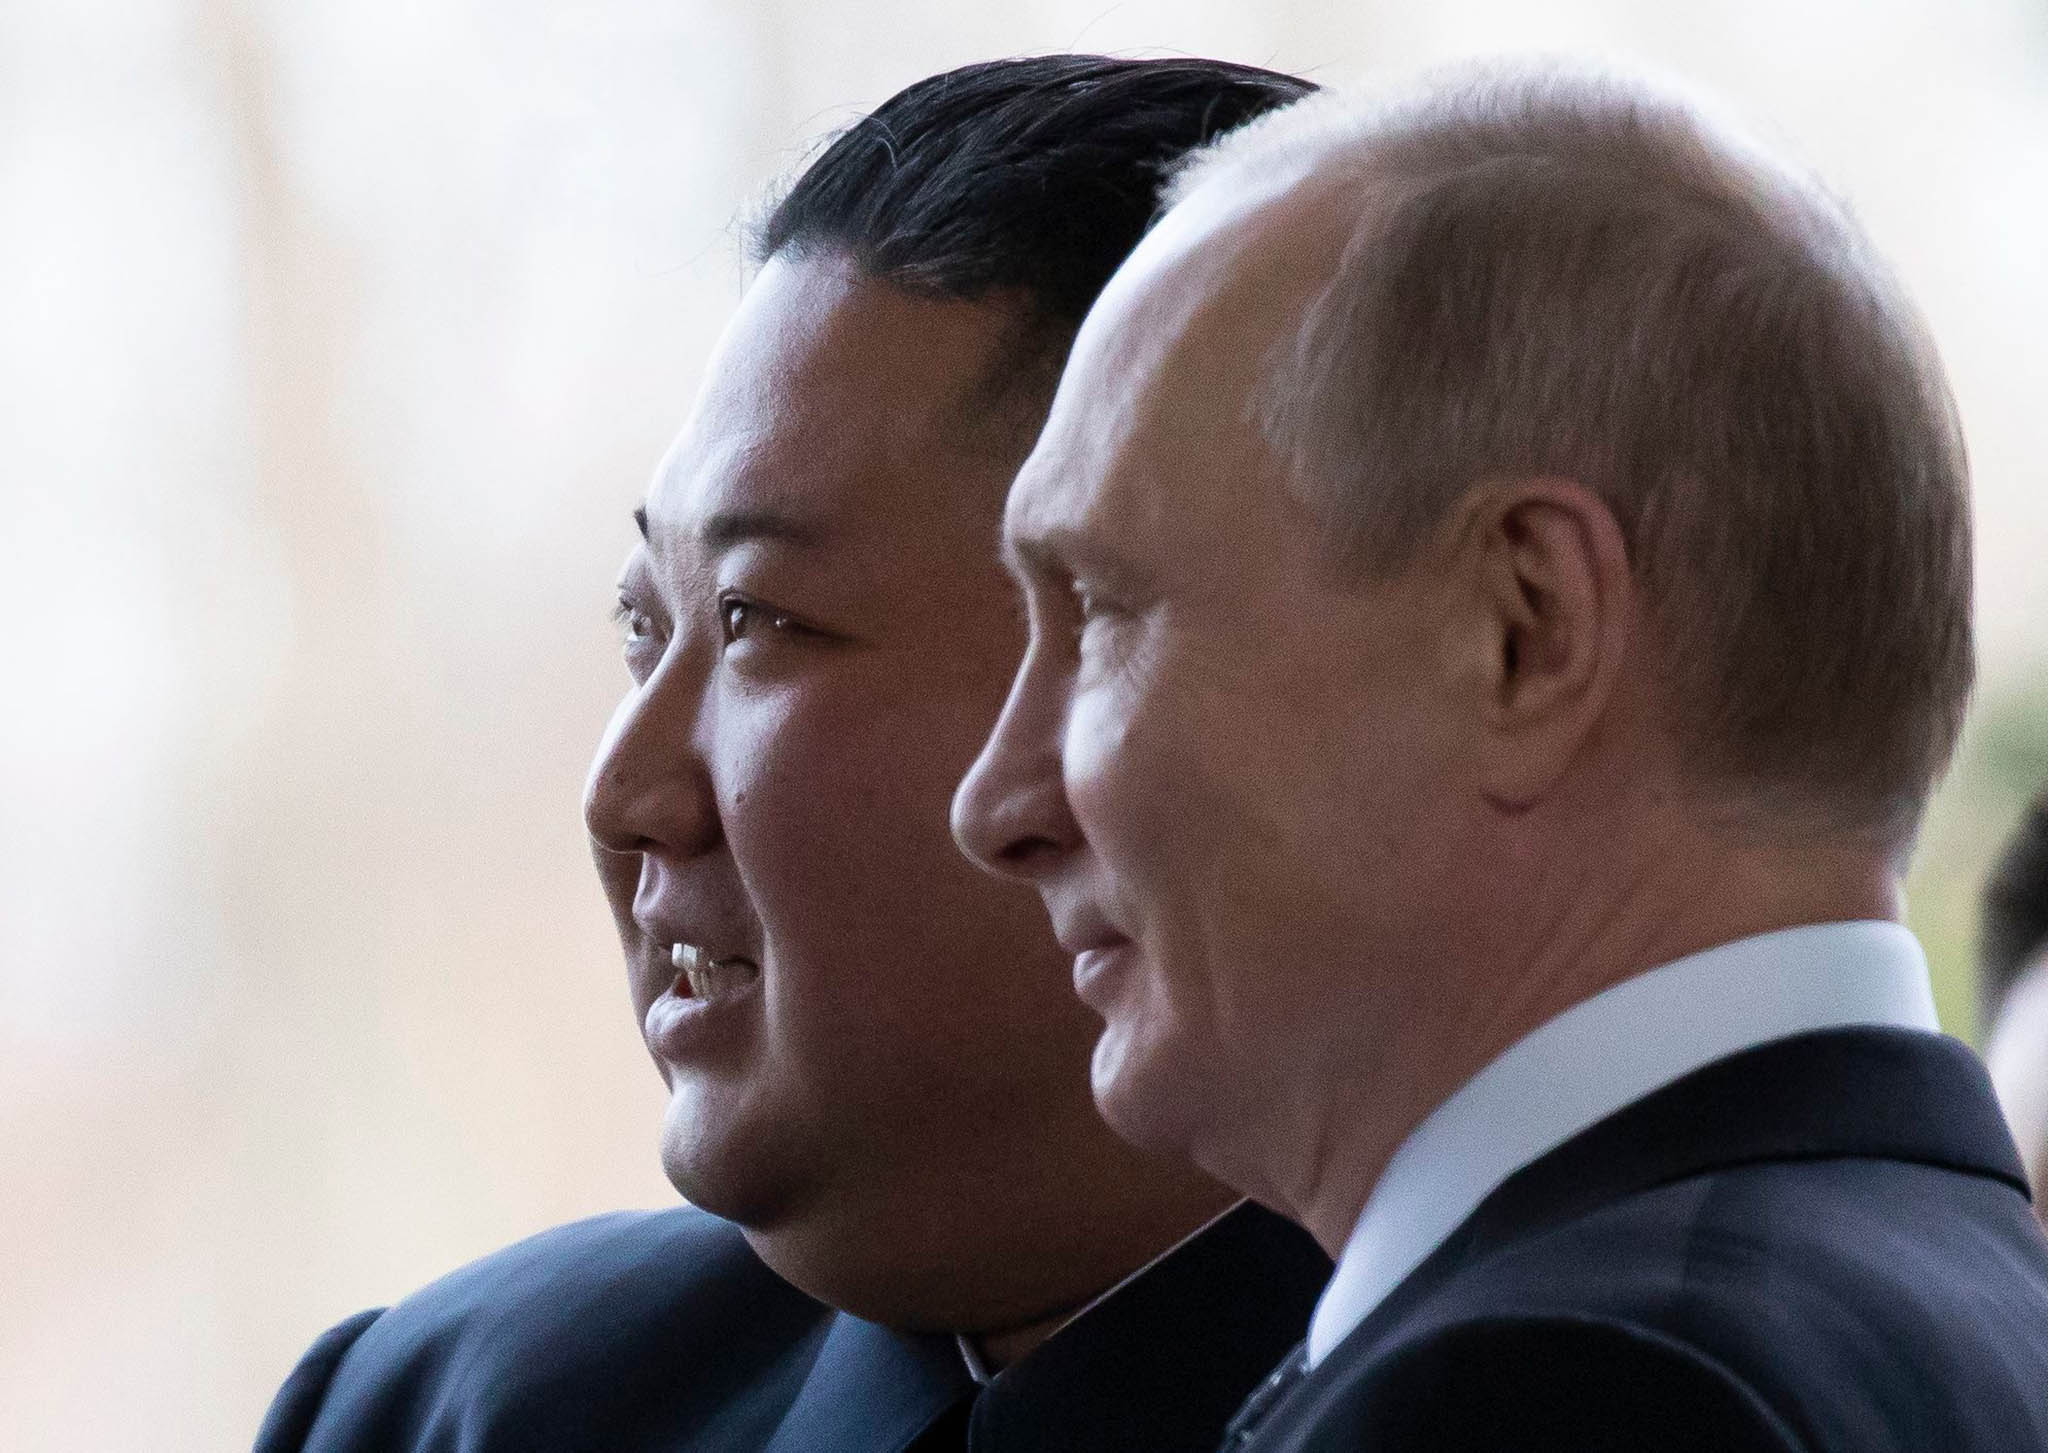 Russian President Vladimir Putin, right, and North Korea’s leader, Kim Jong Un, pose for photos before talks in Vladivostok, Russia, April 25, 2019. The two met more recently in September 2023. (Alexander Zemlianichenko/Pool via The New York Times)